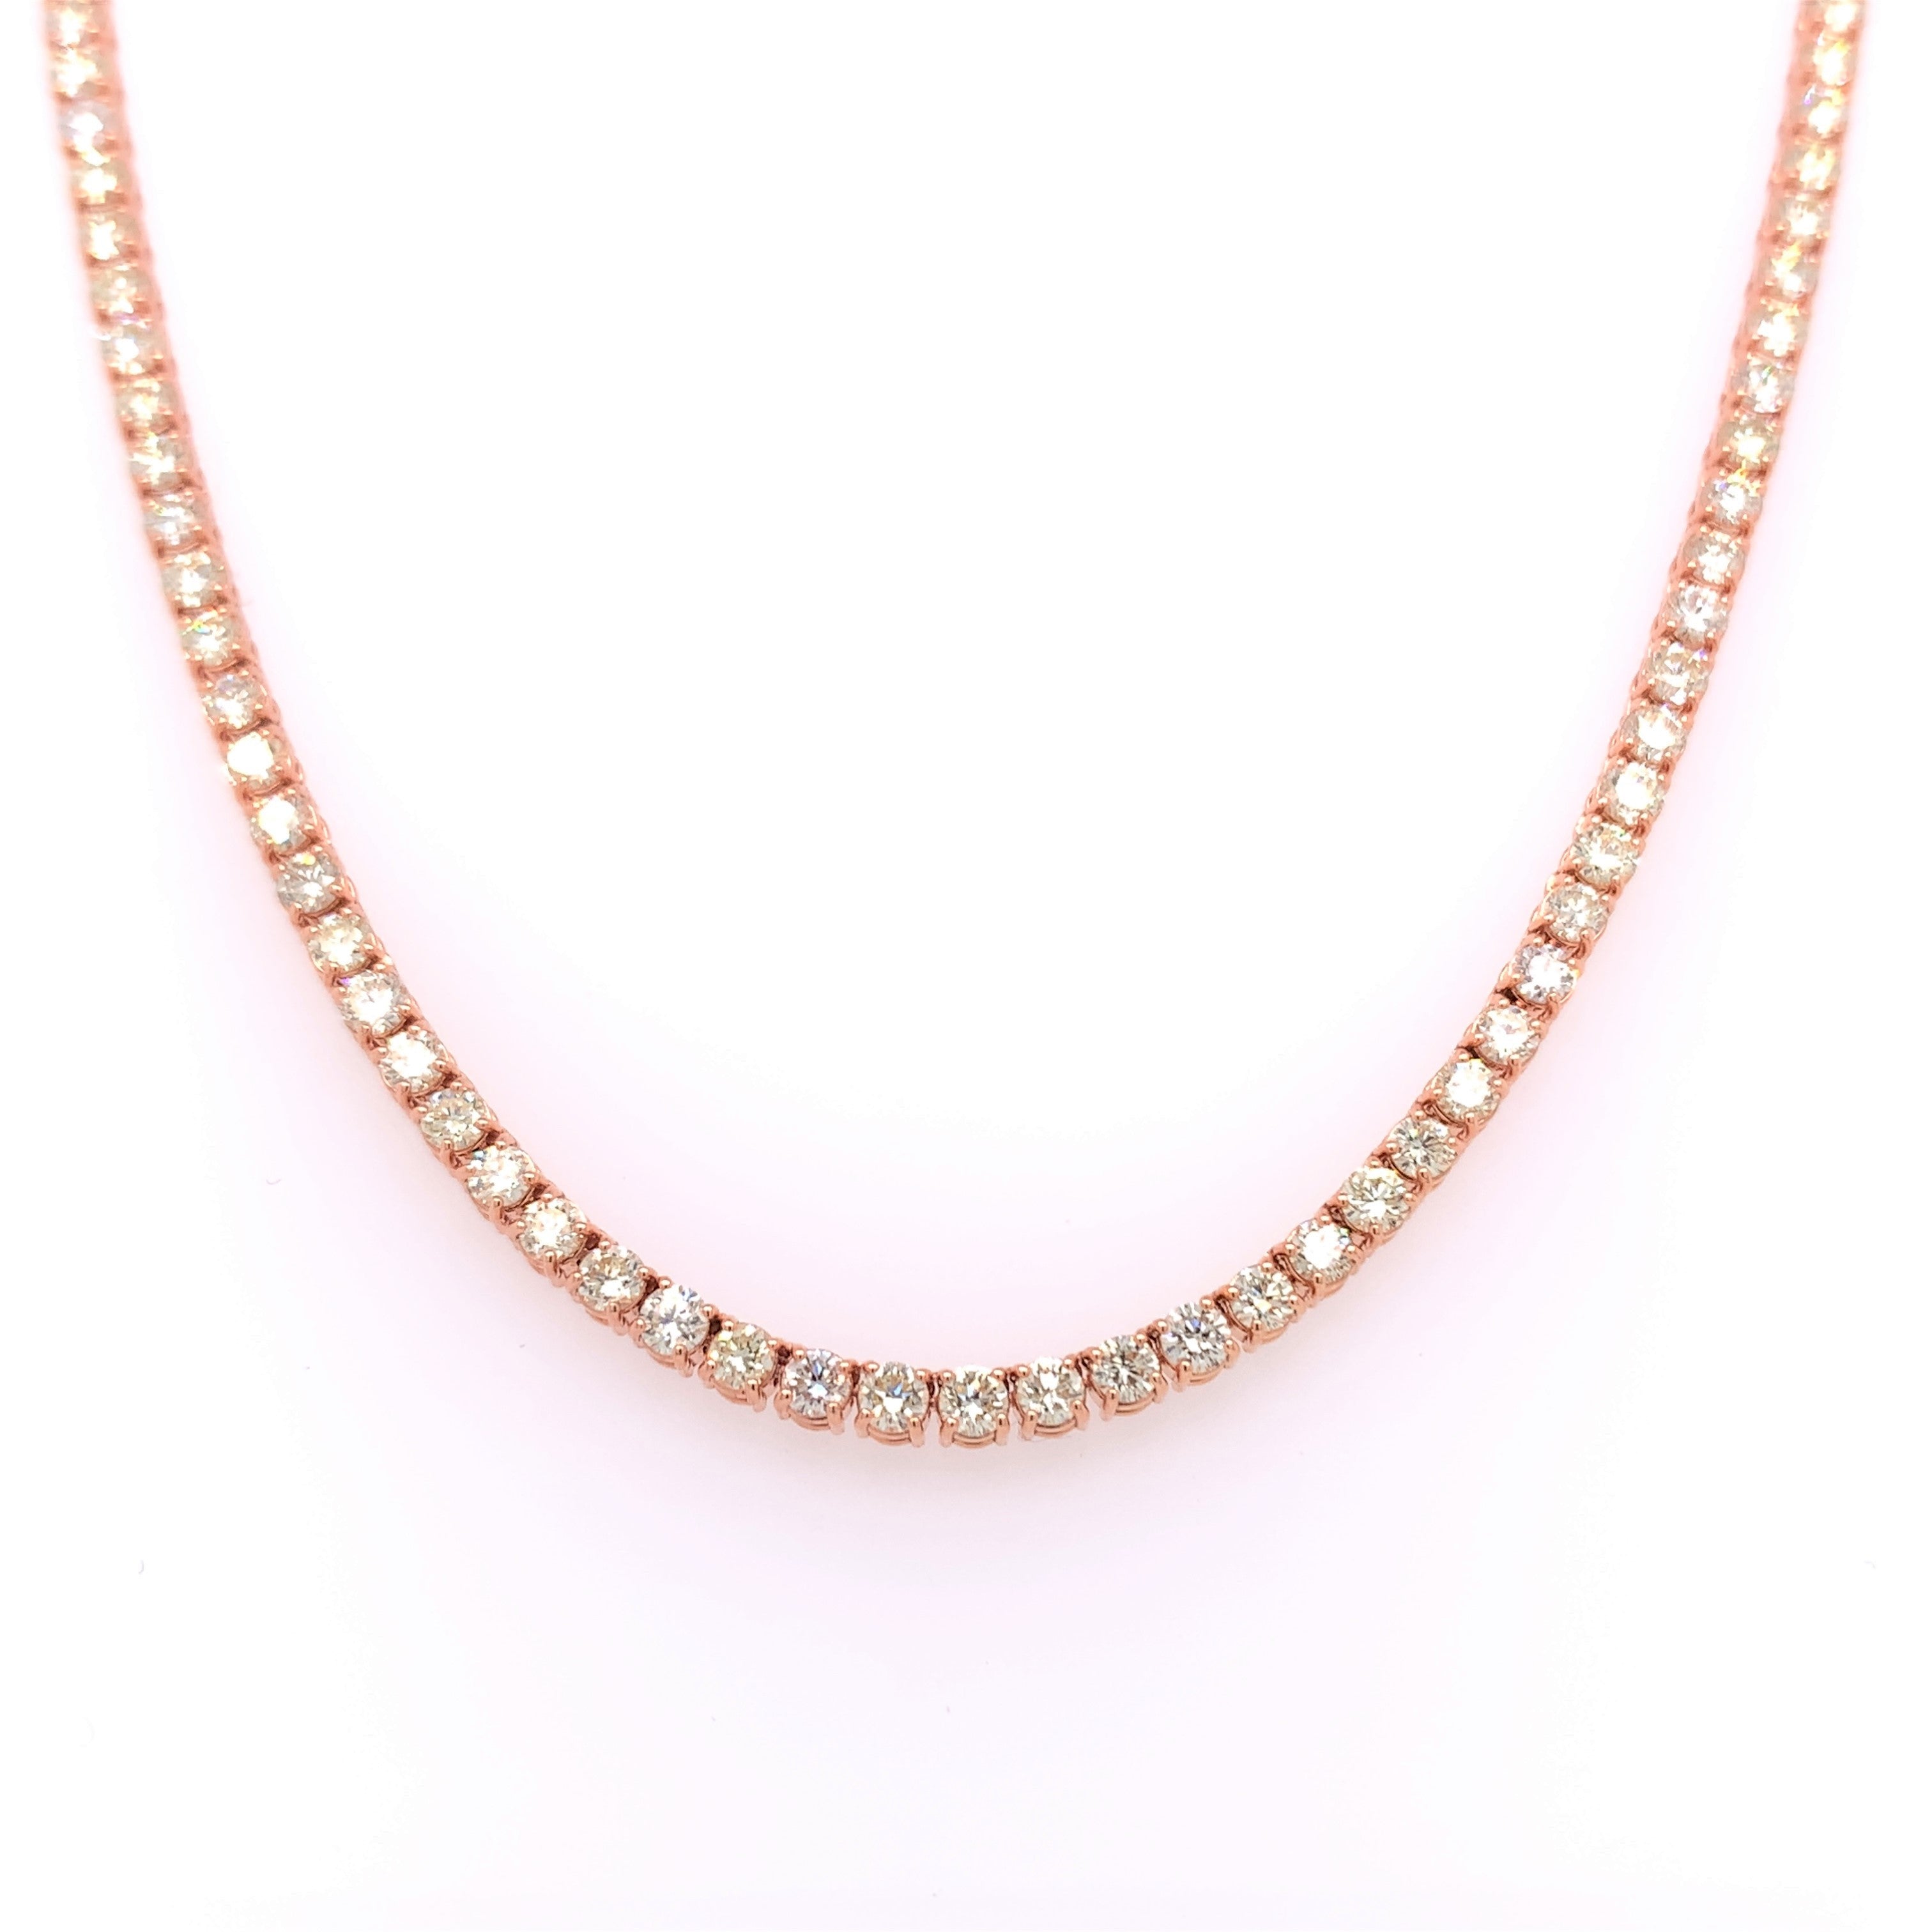 12.50 CT. - 35.00 CT. 14 Pointer Diamond Four Prong Tennis Chain in Gold - White Carat - USA & Canada